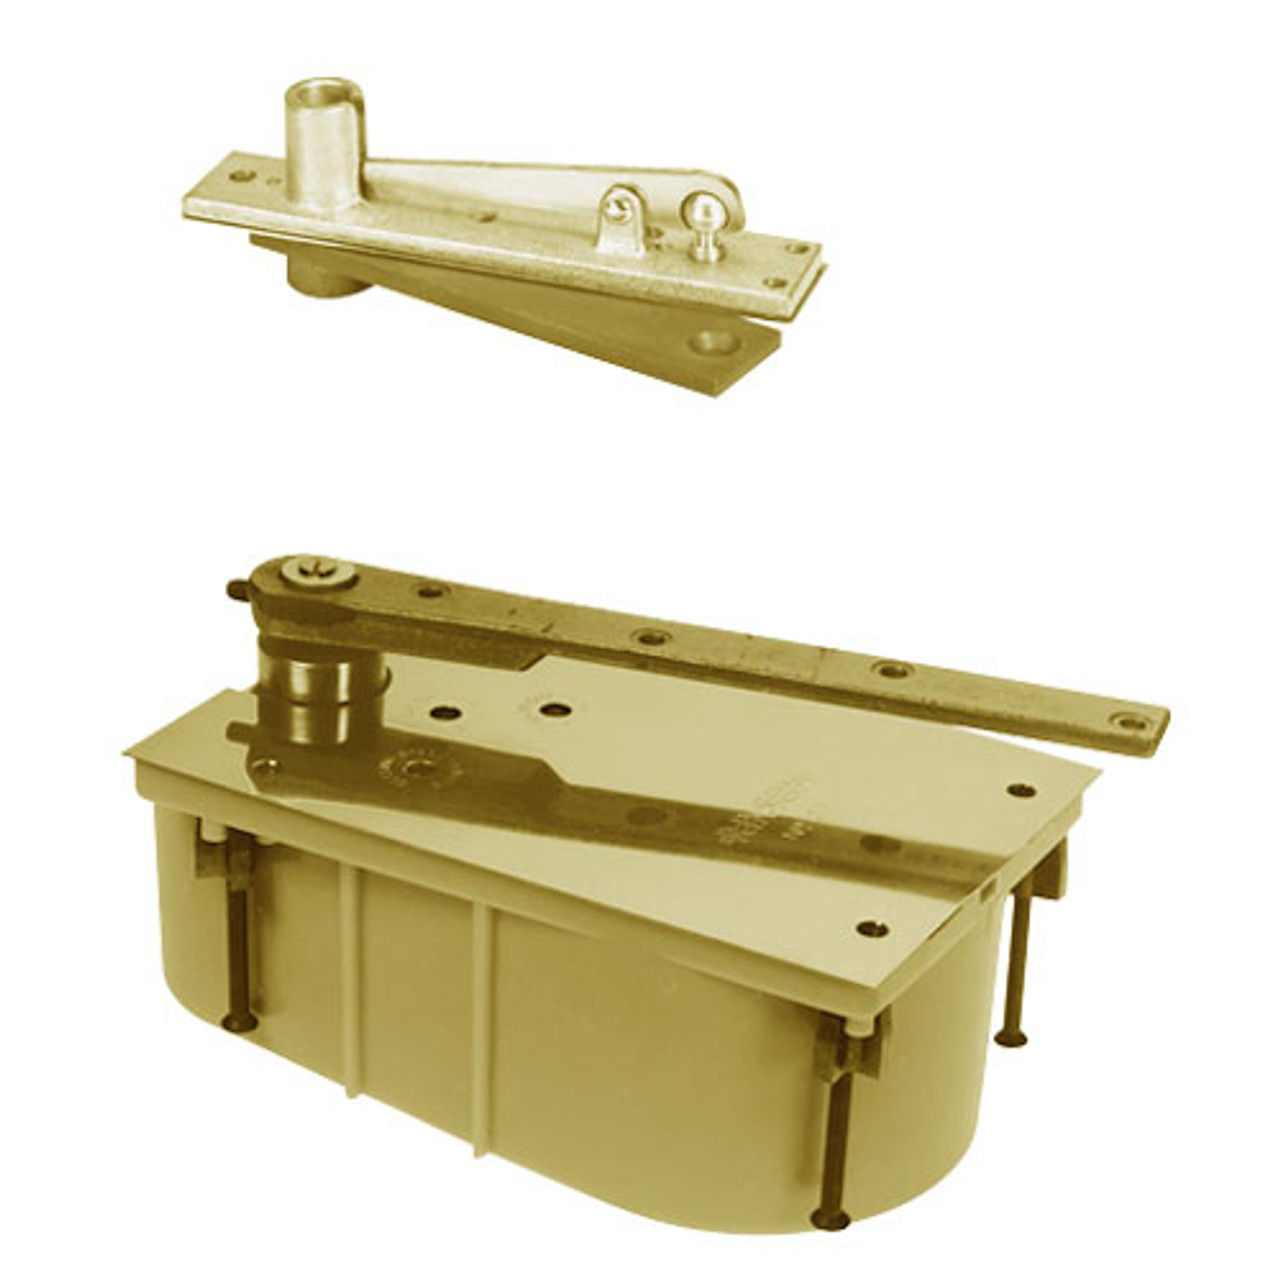 PH28-85S-554-CWF-LH-606 Rixson 28 Series Heavy Duty Single Acting Center Hung Floor Closer with Concealed Arm in Satin Brass Finish